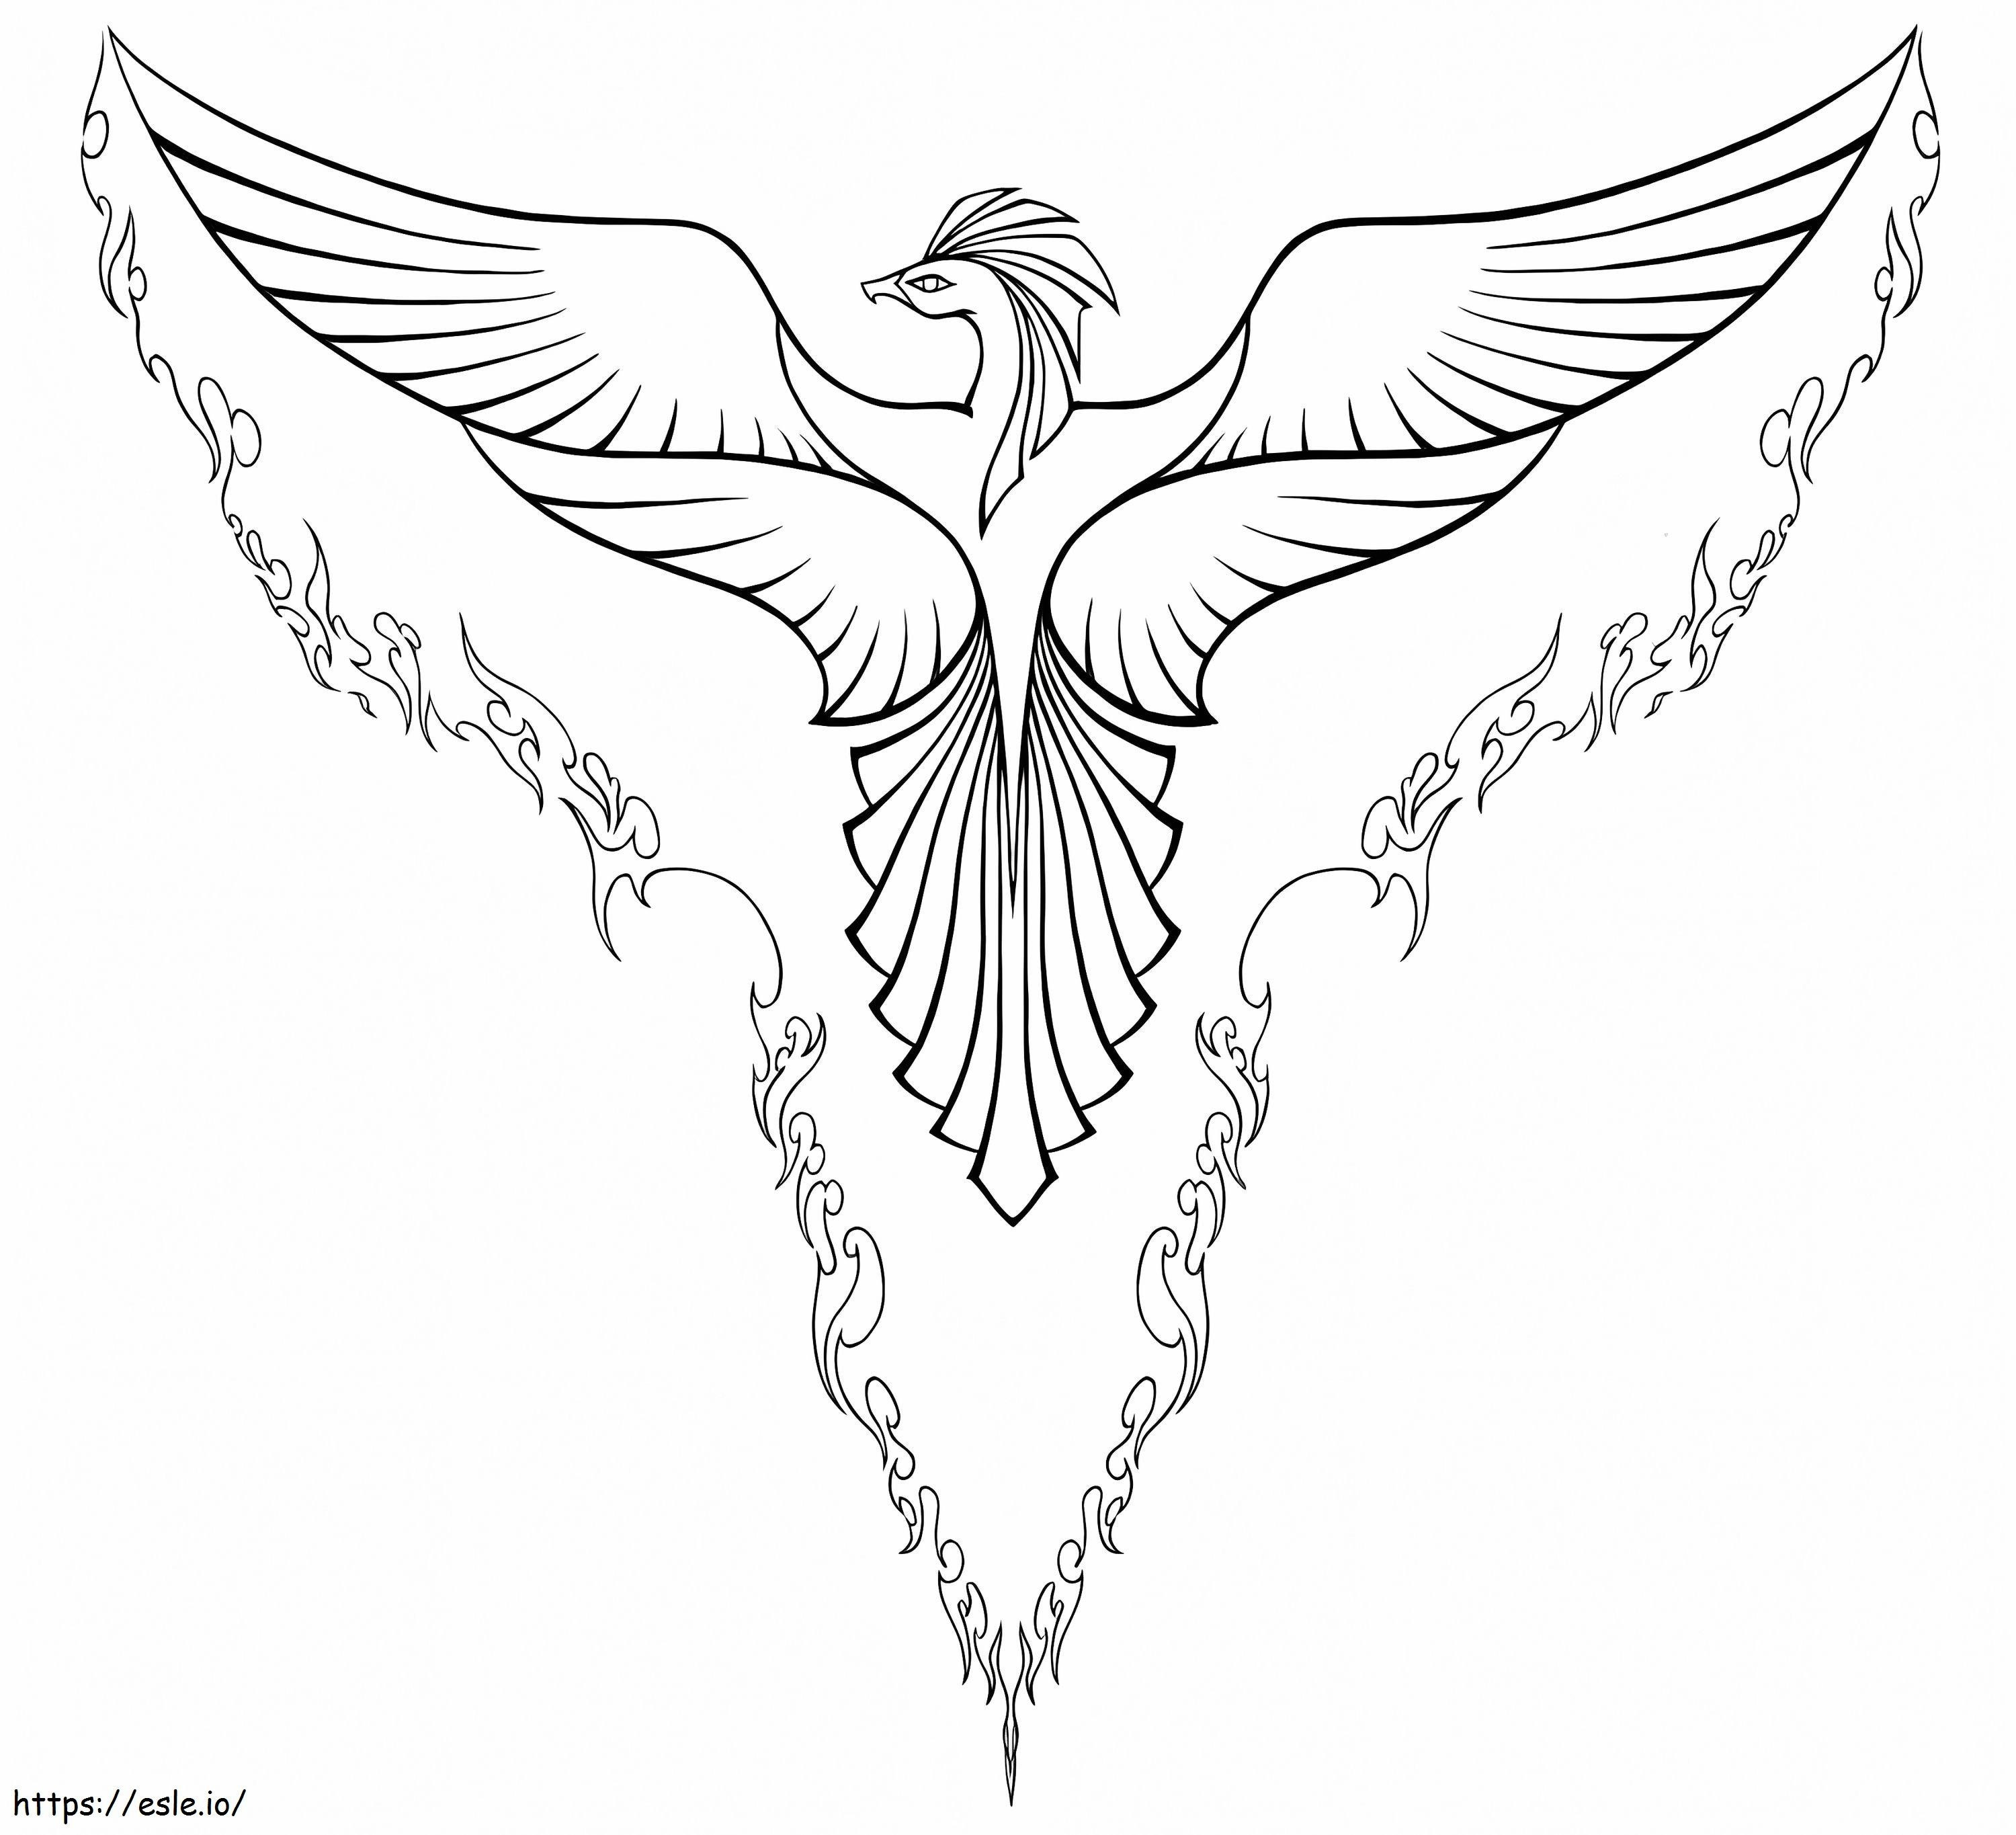 Phoenix Is On Fire coloring page